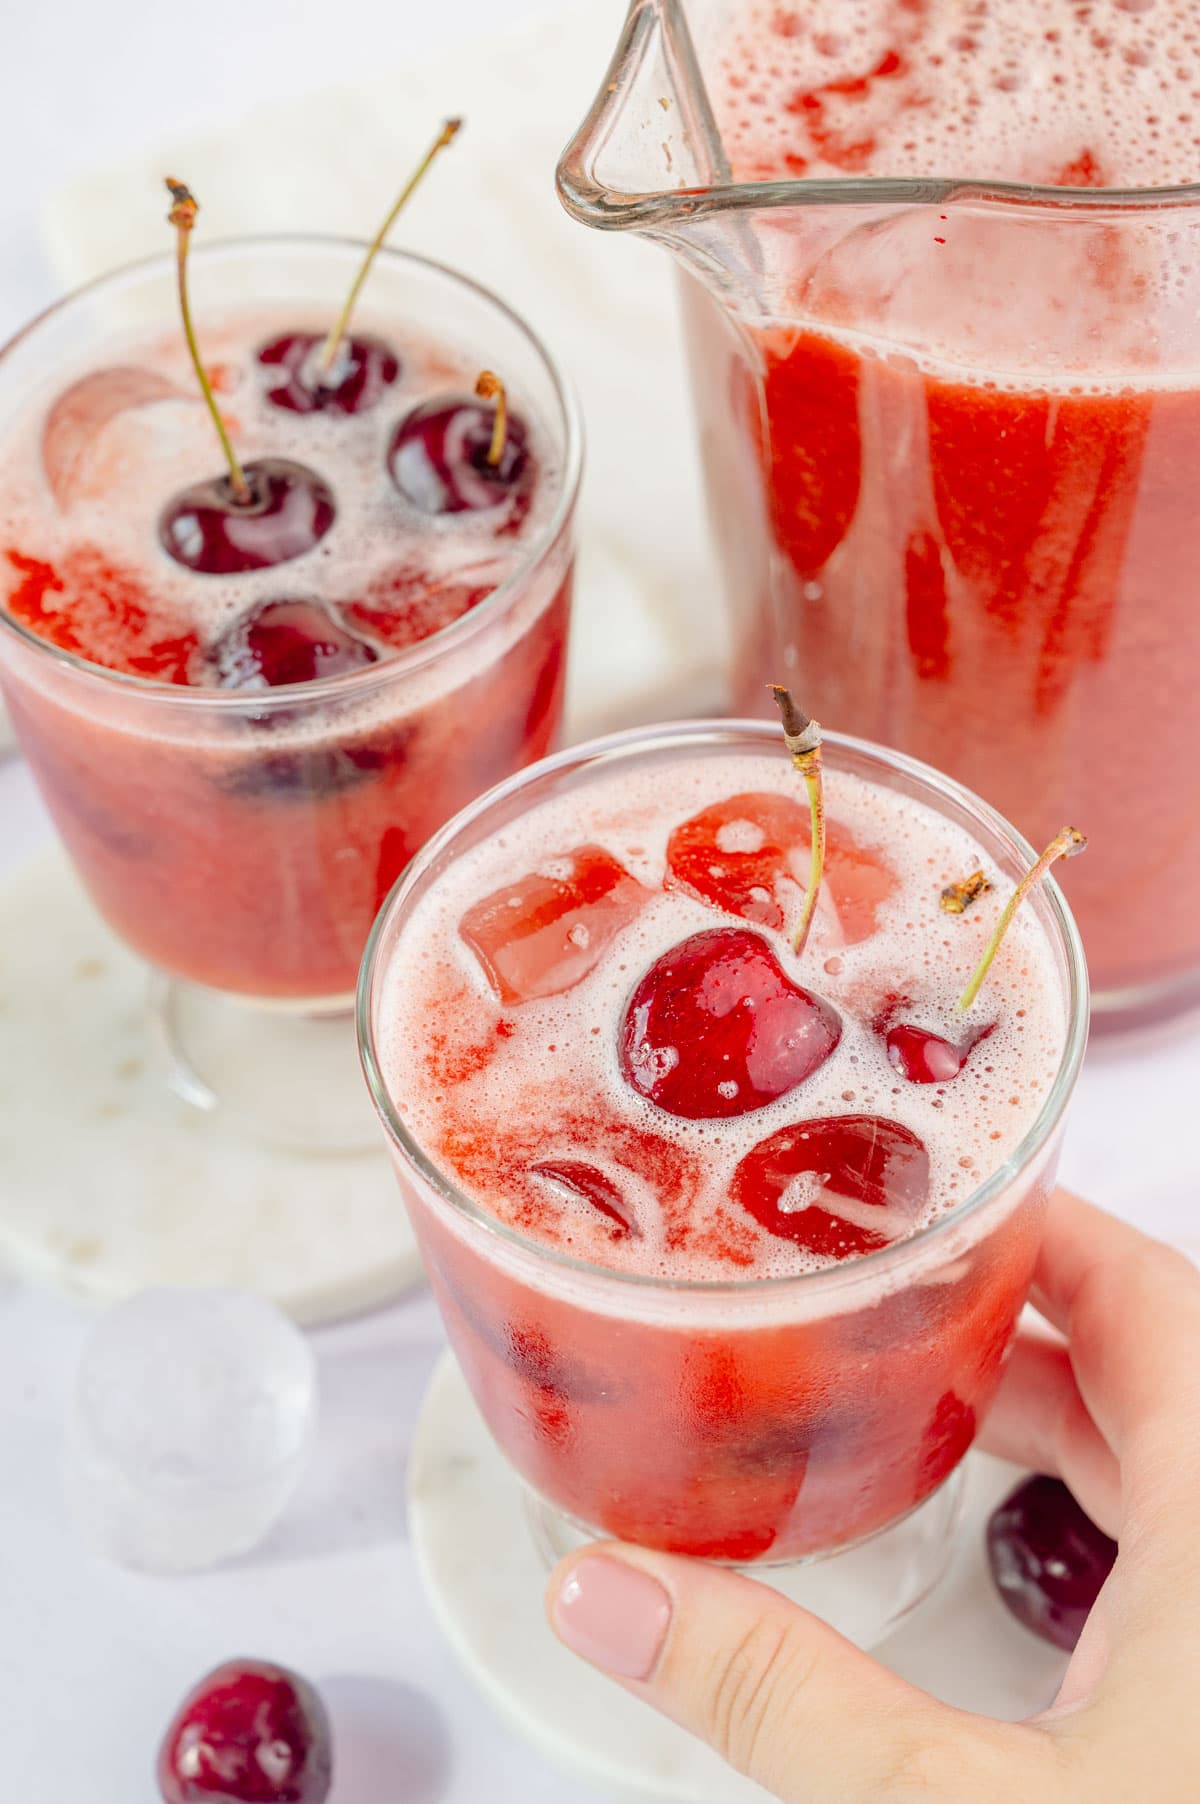 Two glasses and a pitcher with cherry lemonade. One glass is held in a hand.